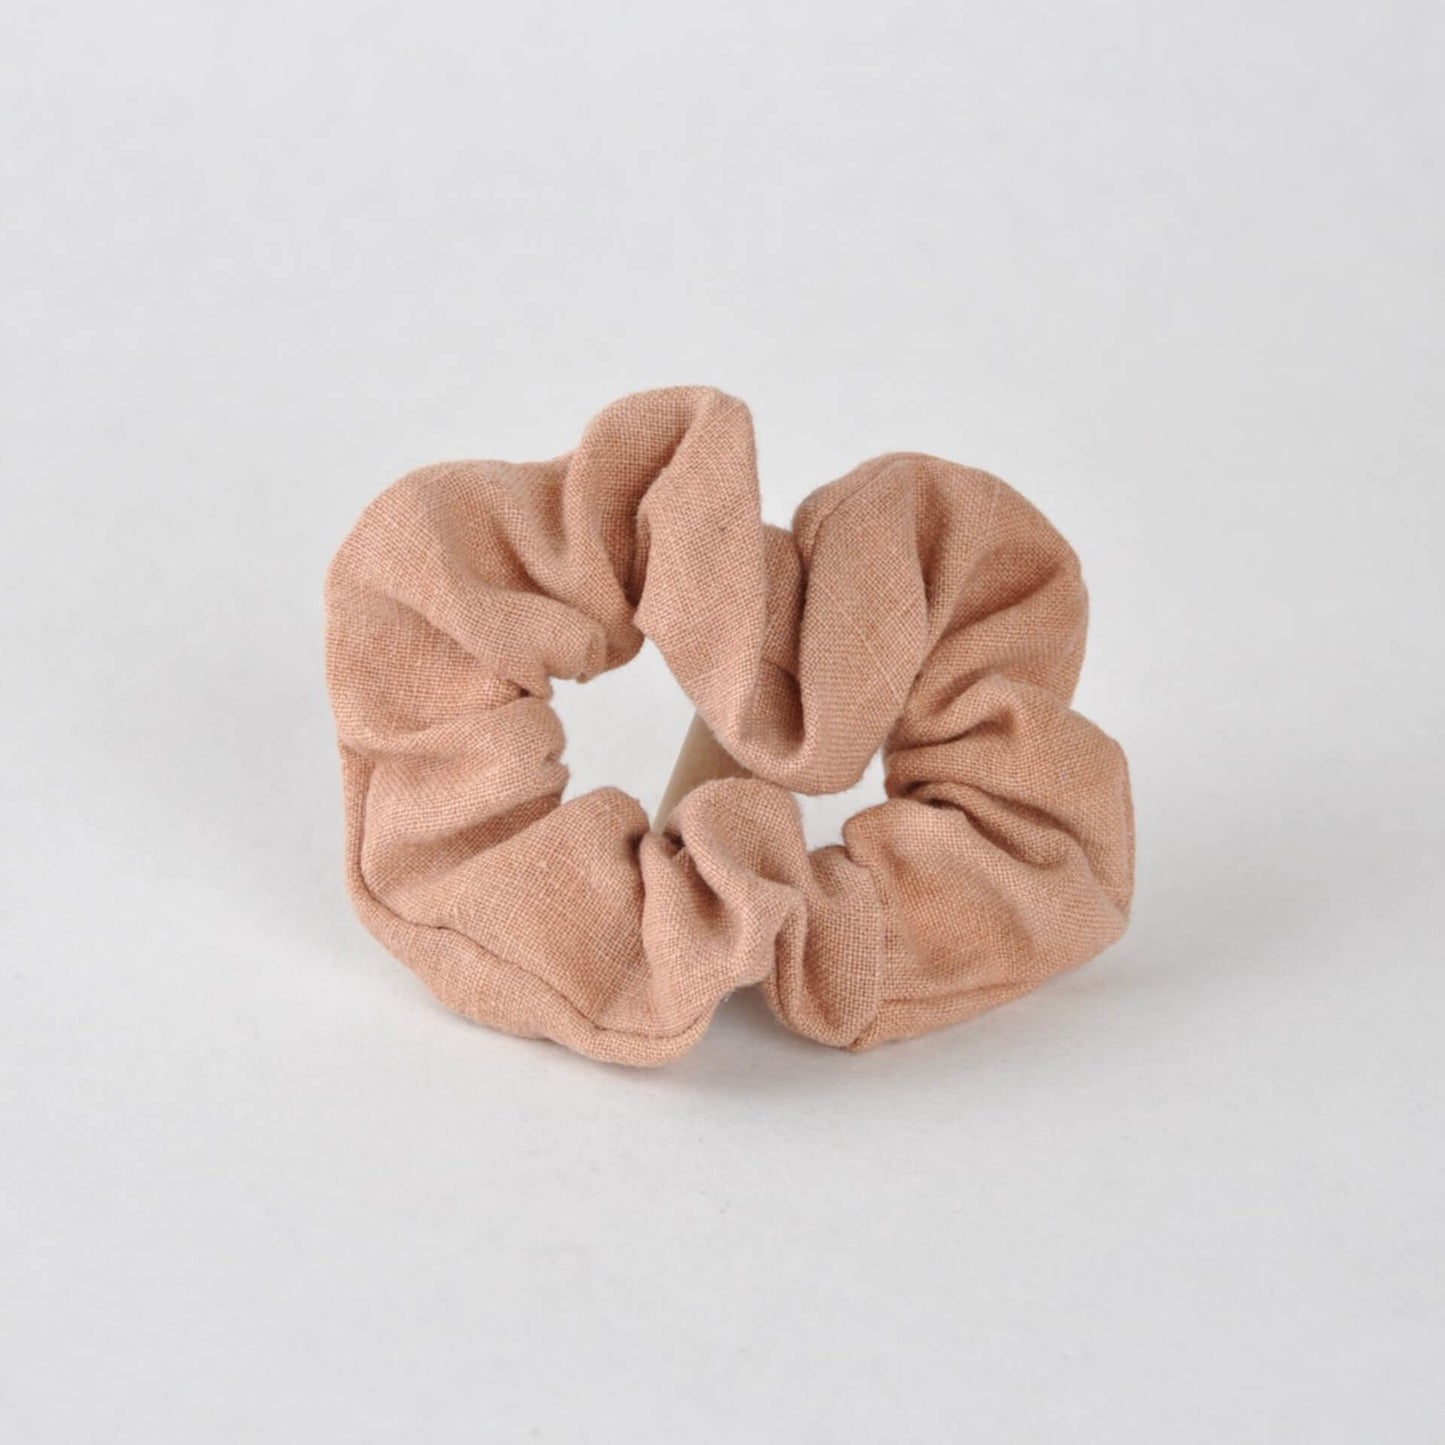 COCOON Natural Dye House Scrunchy Naturally Dyed Vintage Linen Scrunchie